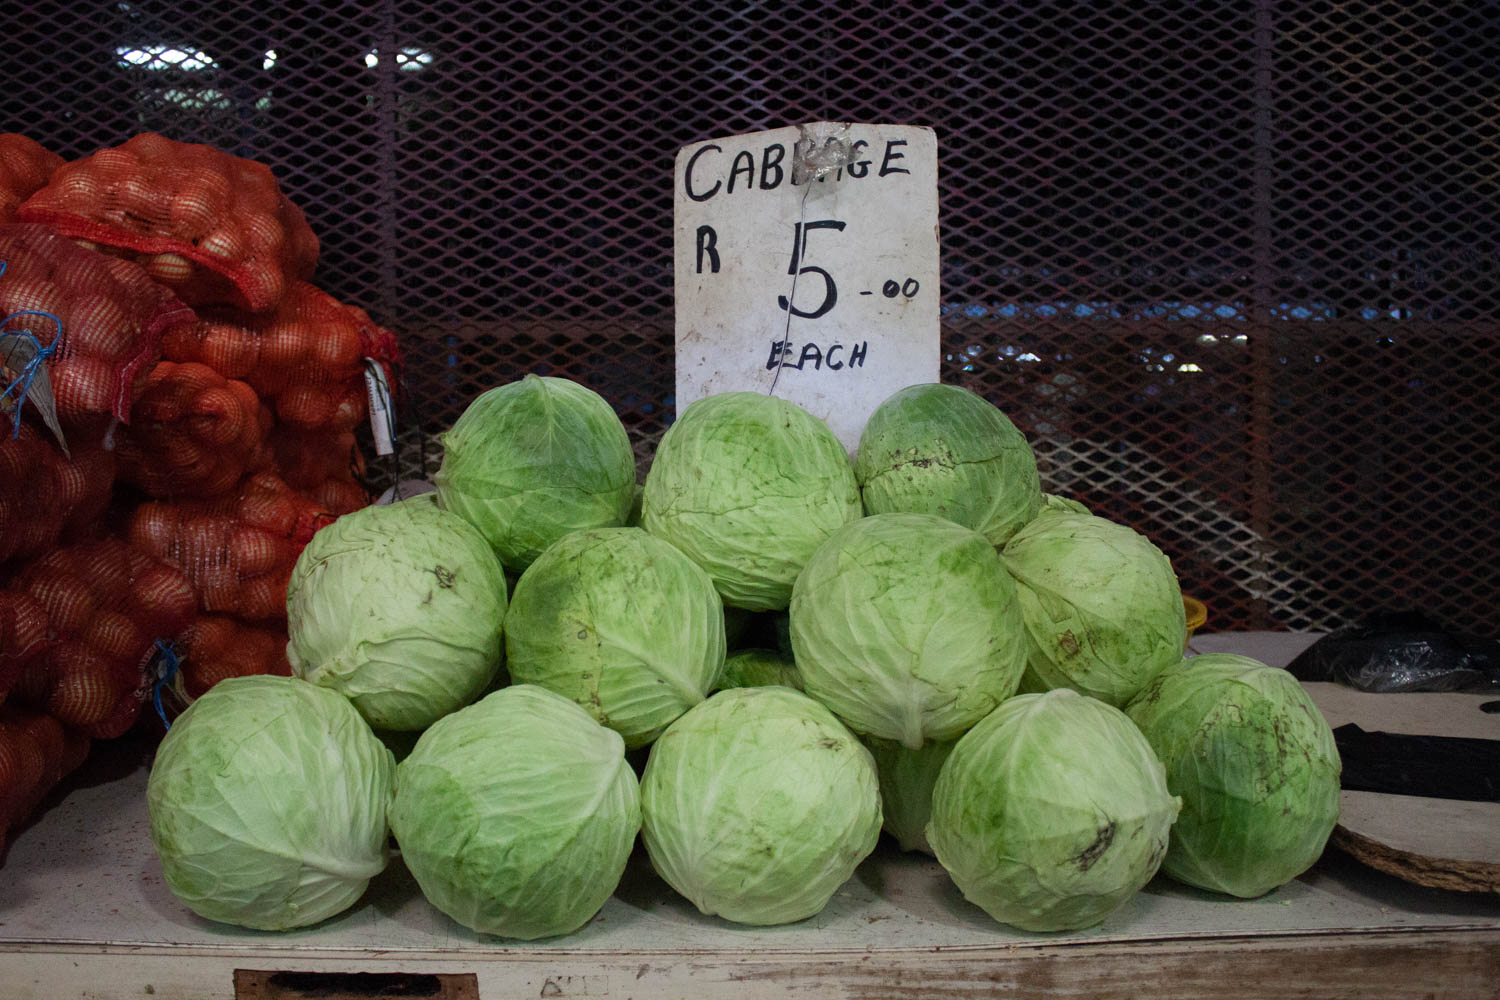 Cabbage for sale at Warwick Market.